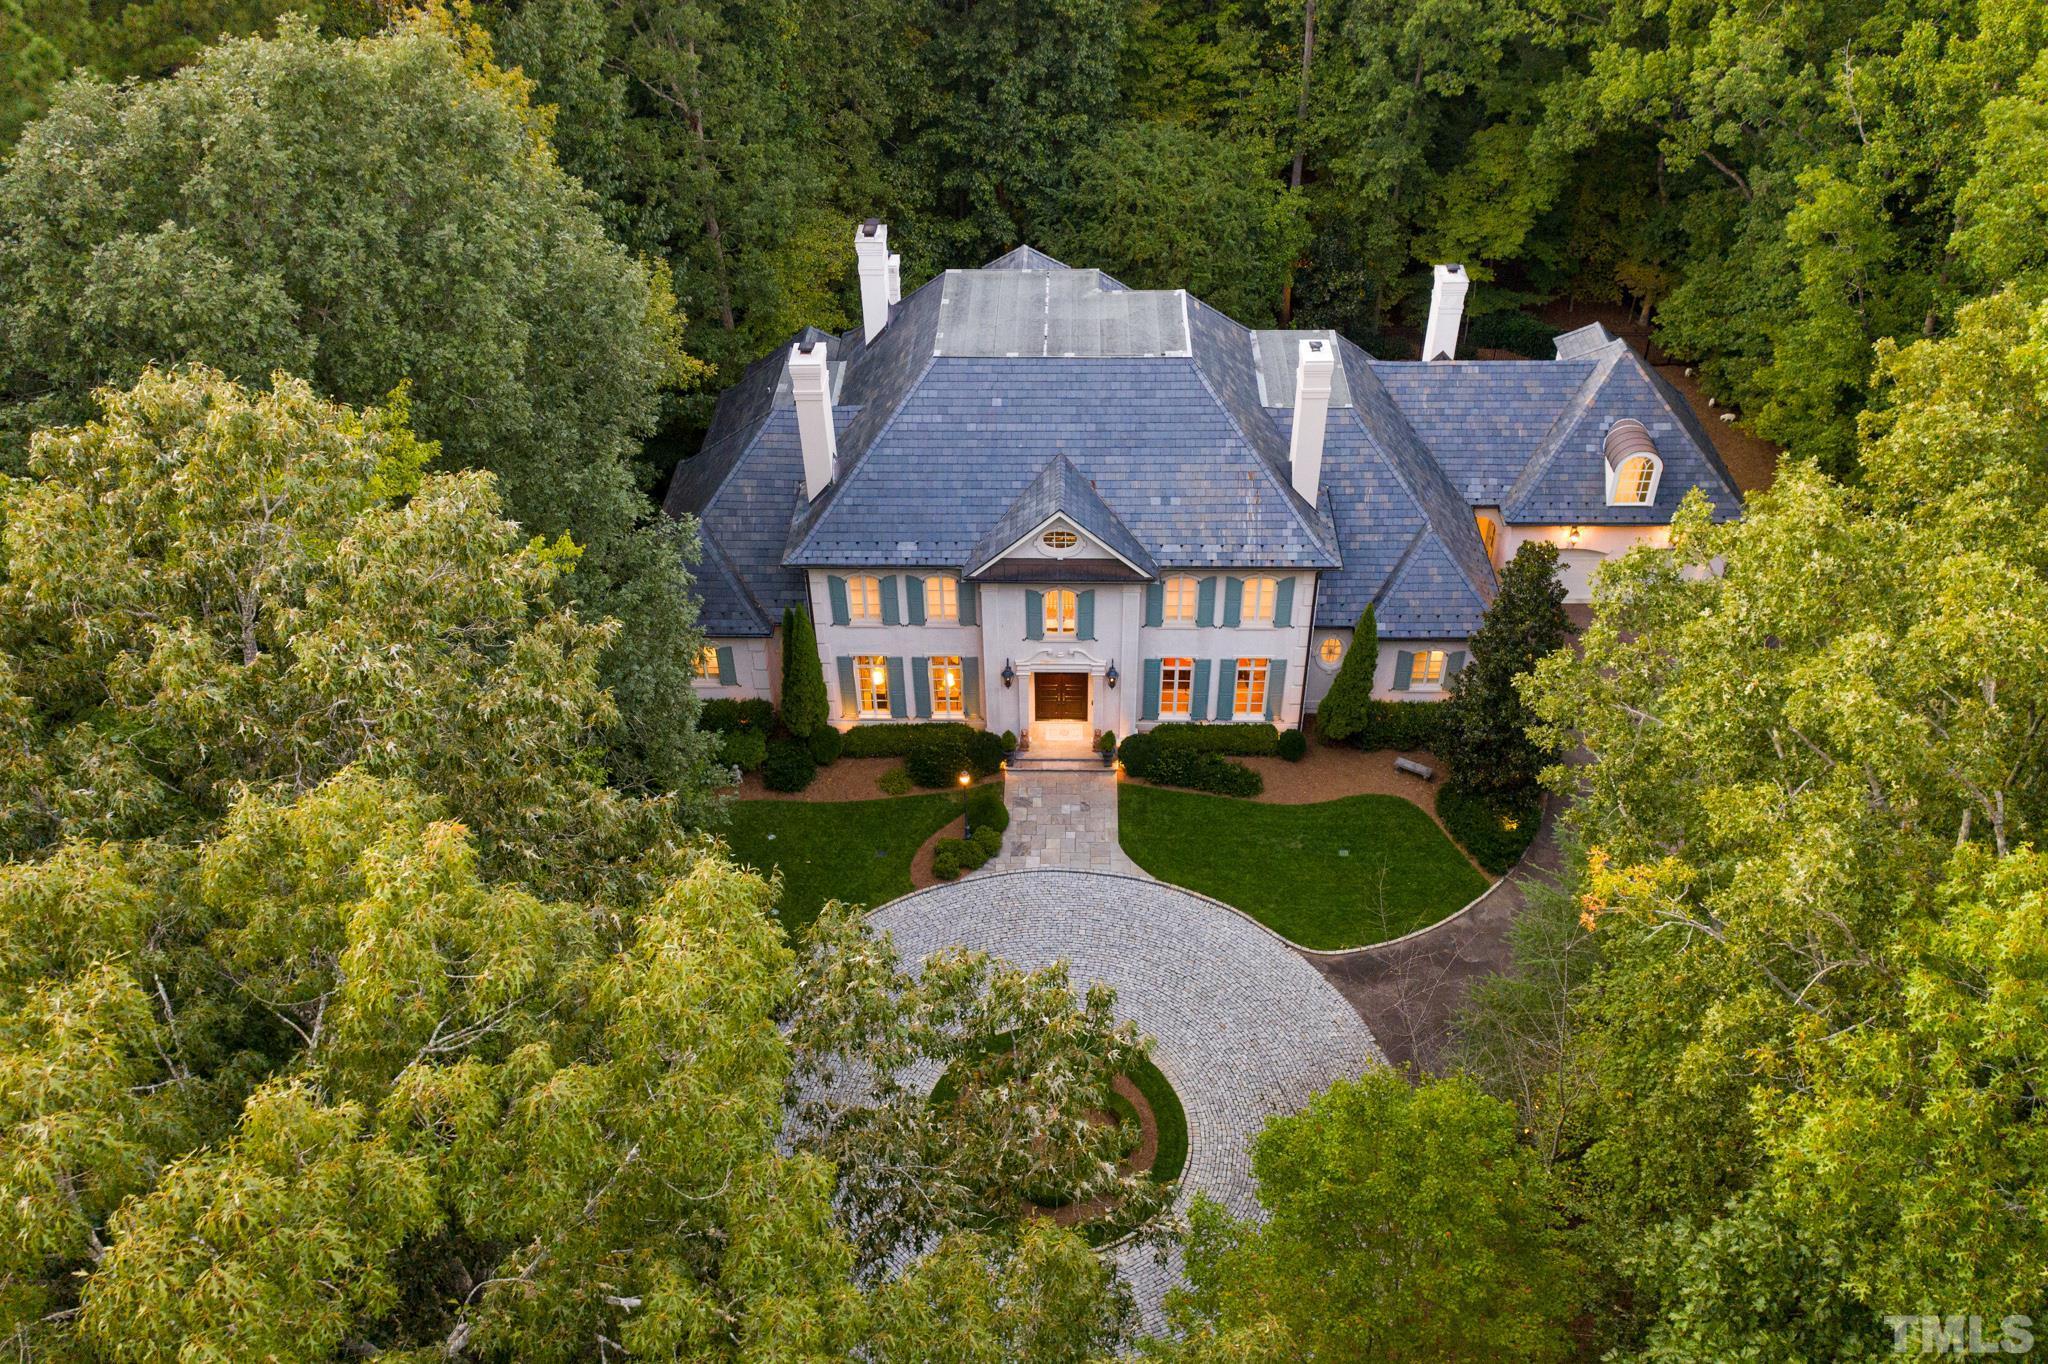 Ultimate seclusion nestled on 2+ac backing to Falls lake preserve land (nothing can be built) w/Gated entry; Barely lived in, Rufty Custom Built w/no detail overlooked; Craftsmanship that???s almost impossible to replicate (cost $7.5M+ to build today)